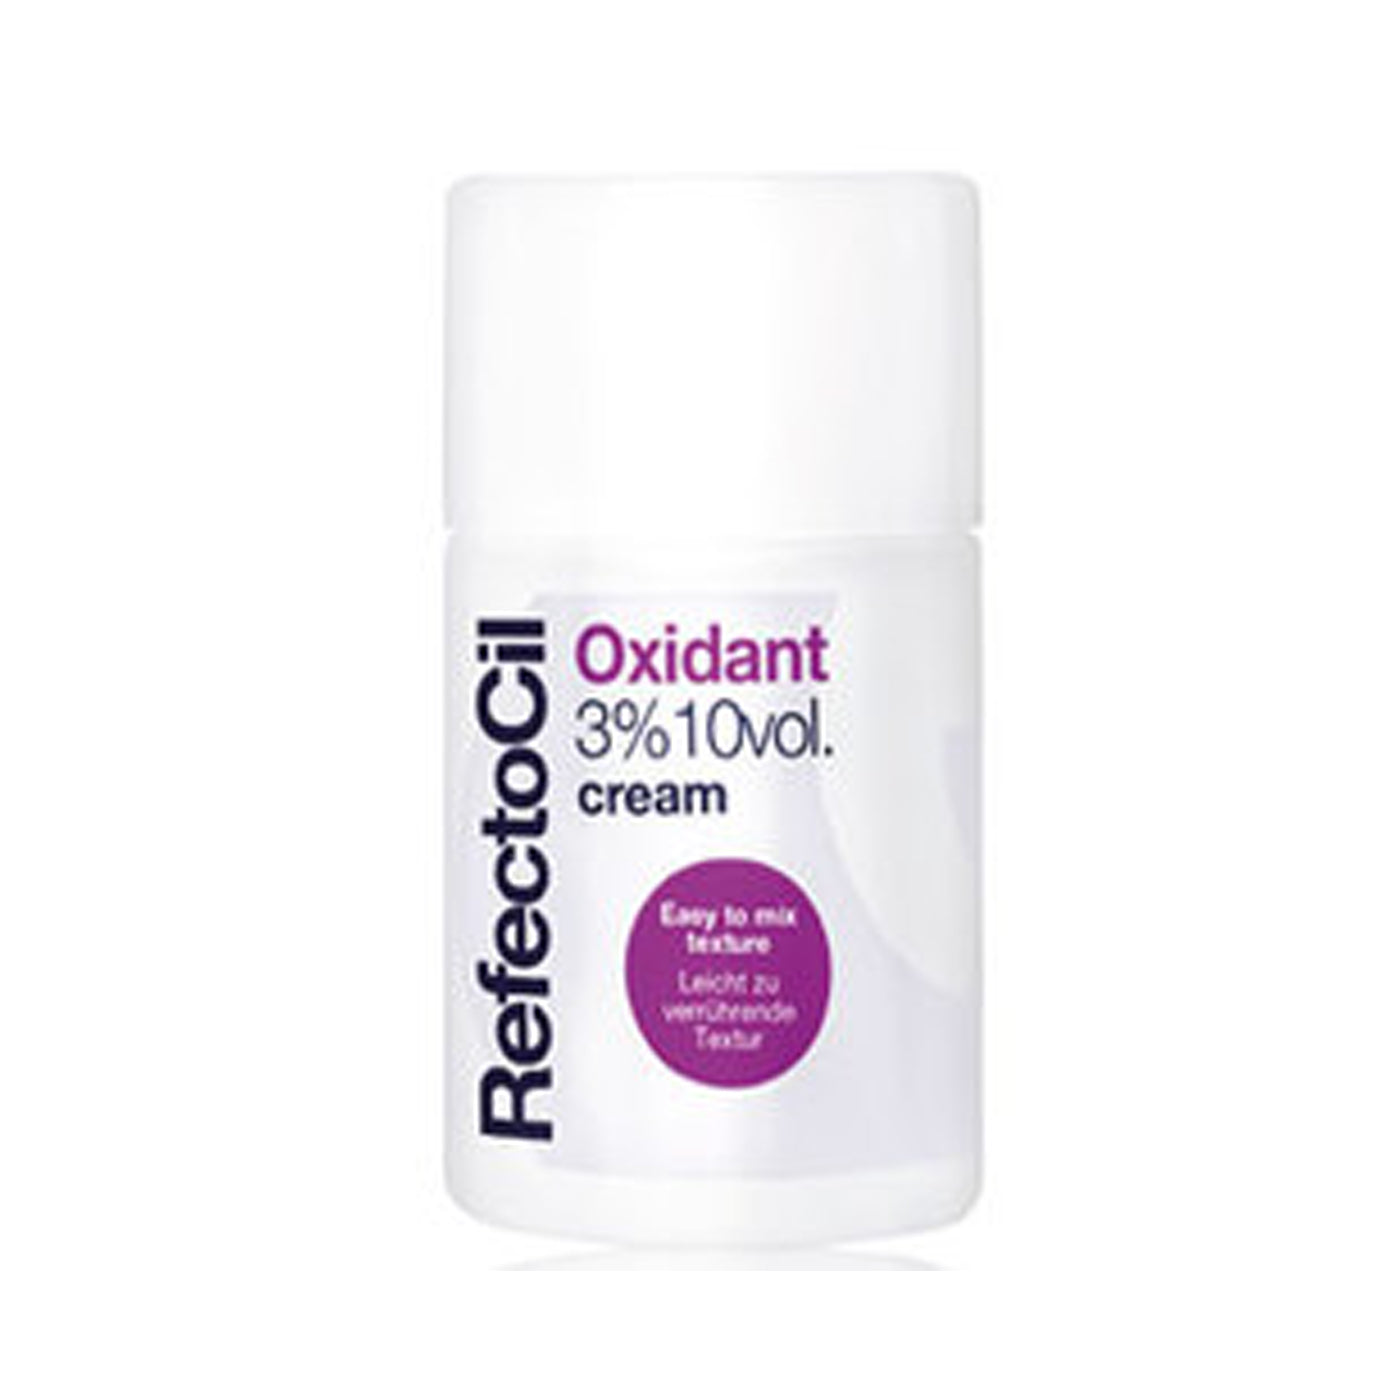 RefectoCil Cream Oxidant 3% (10 vol) (100ml) - Ultimate Hair and Beauty